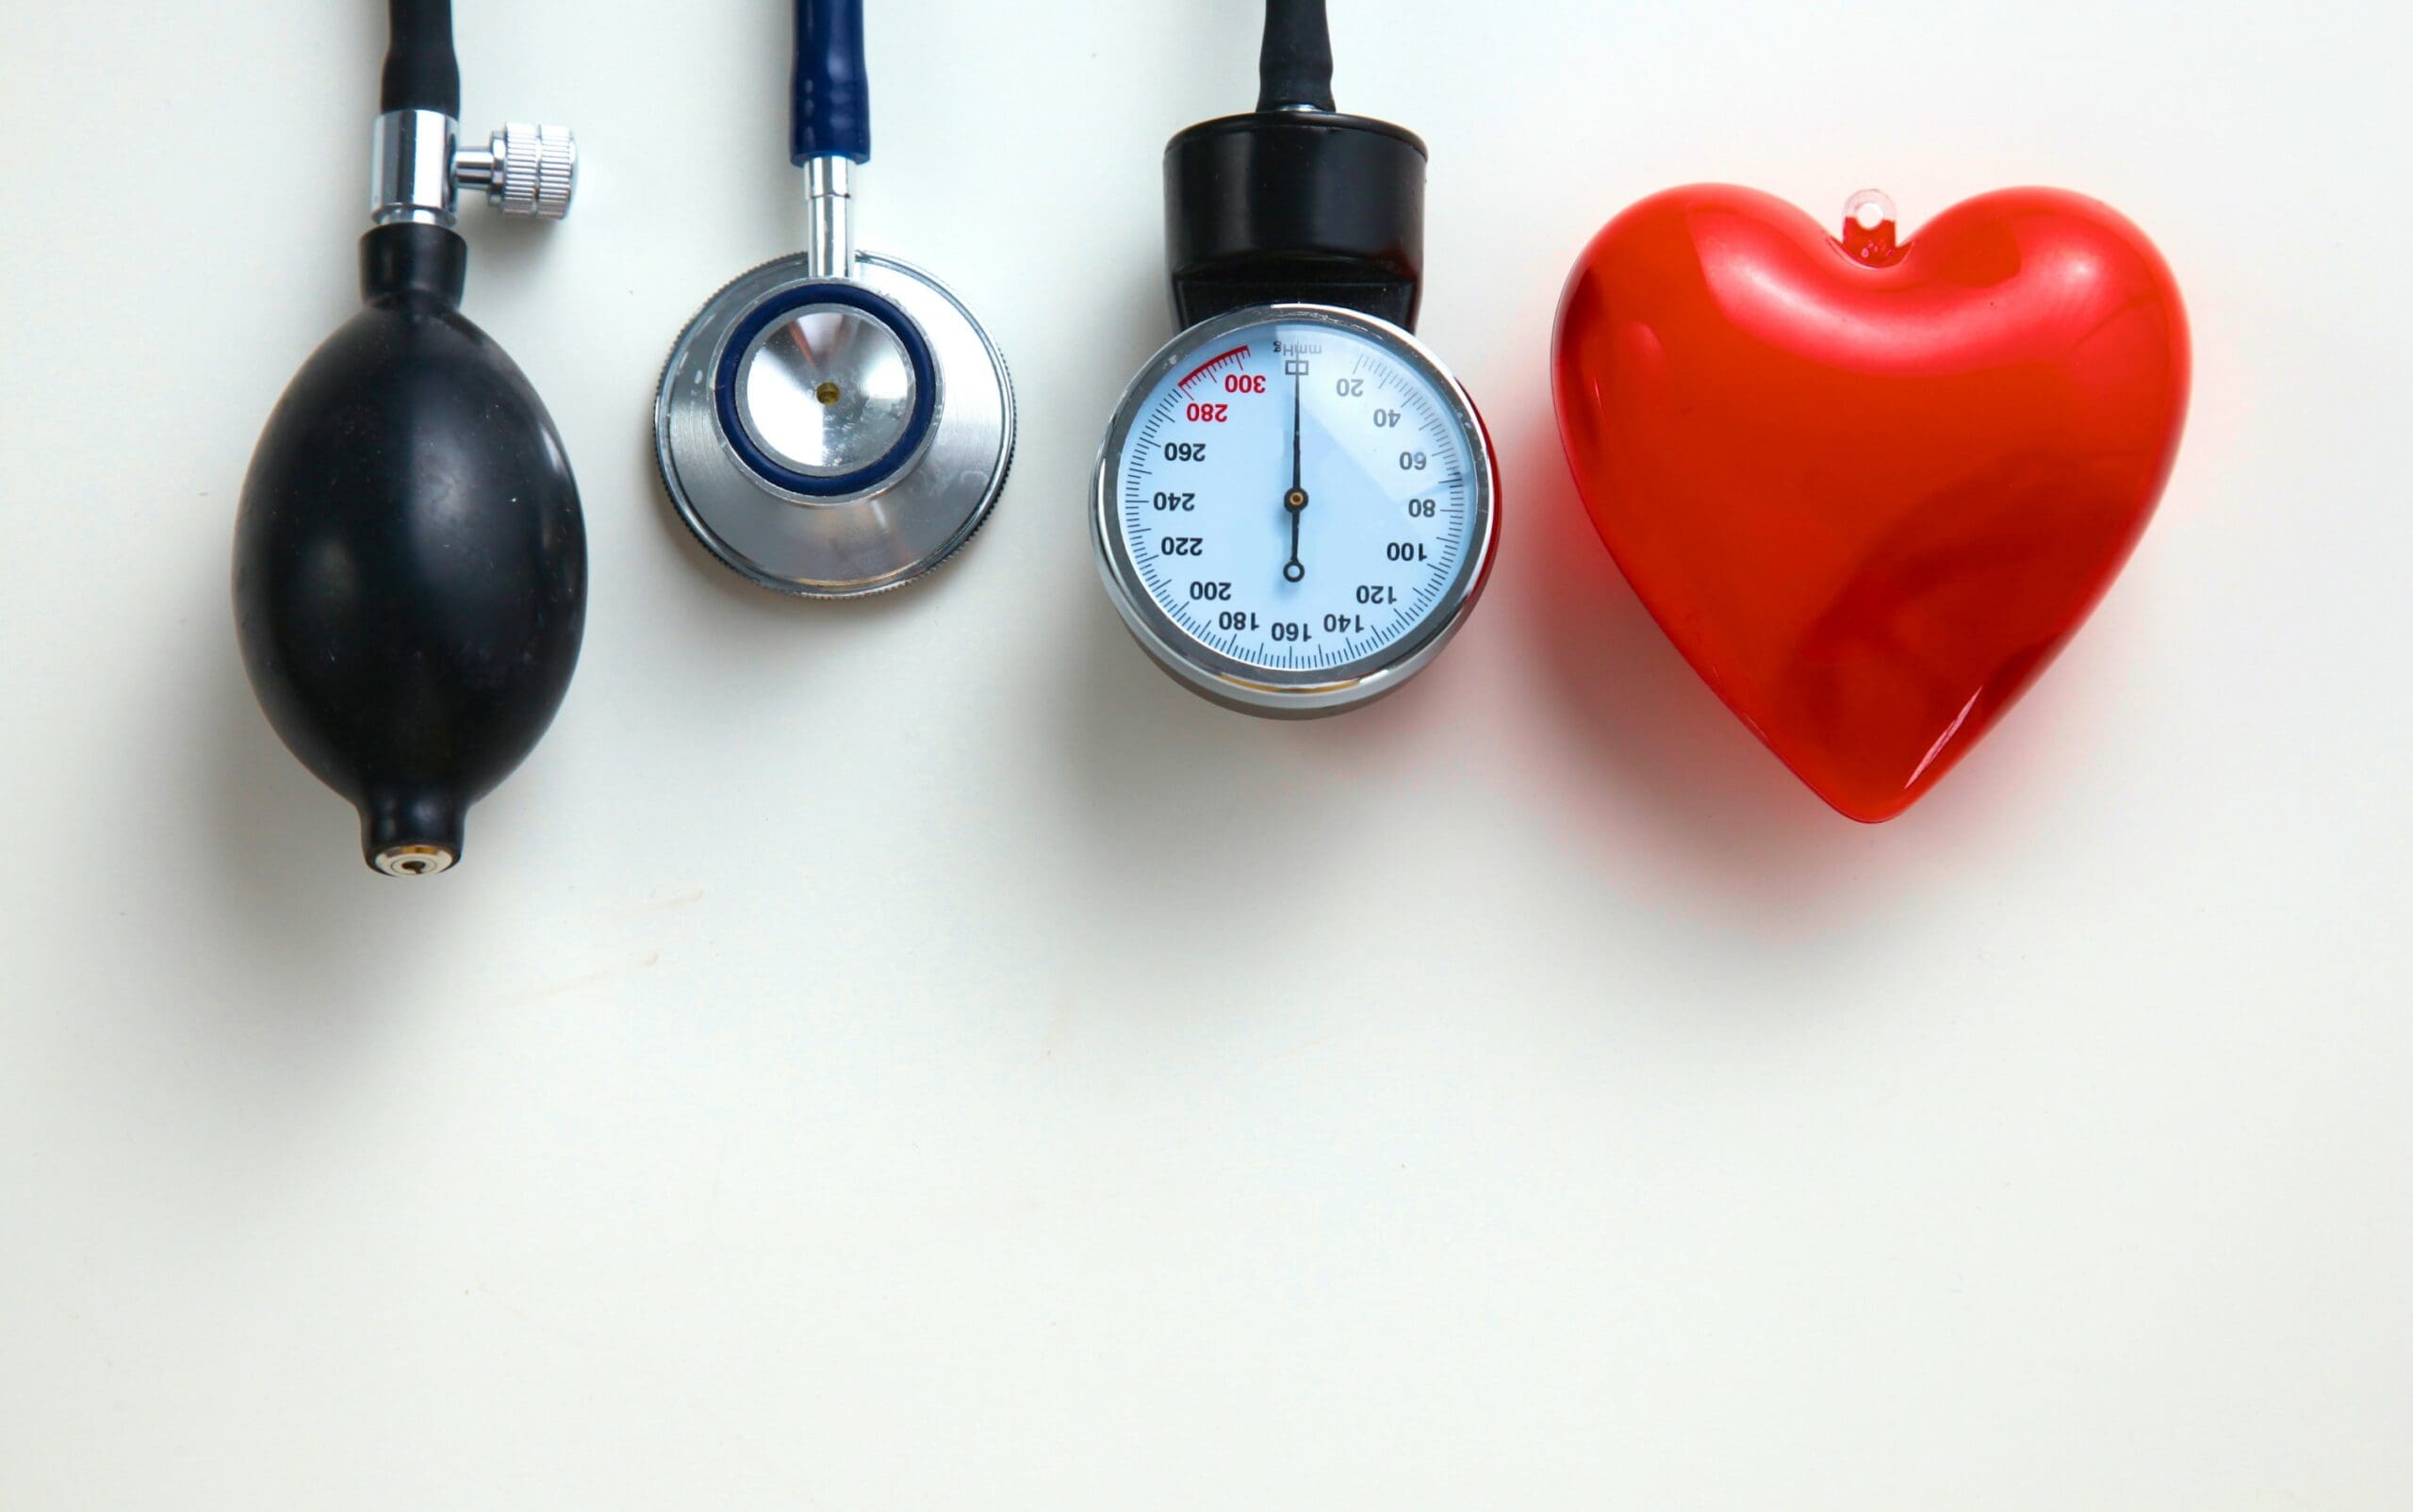 Who gets low blood pressure?